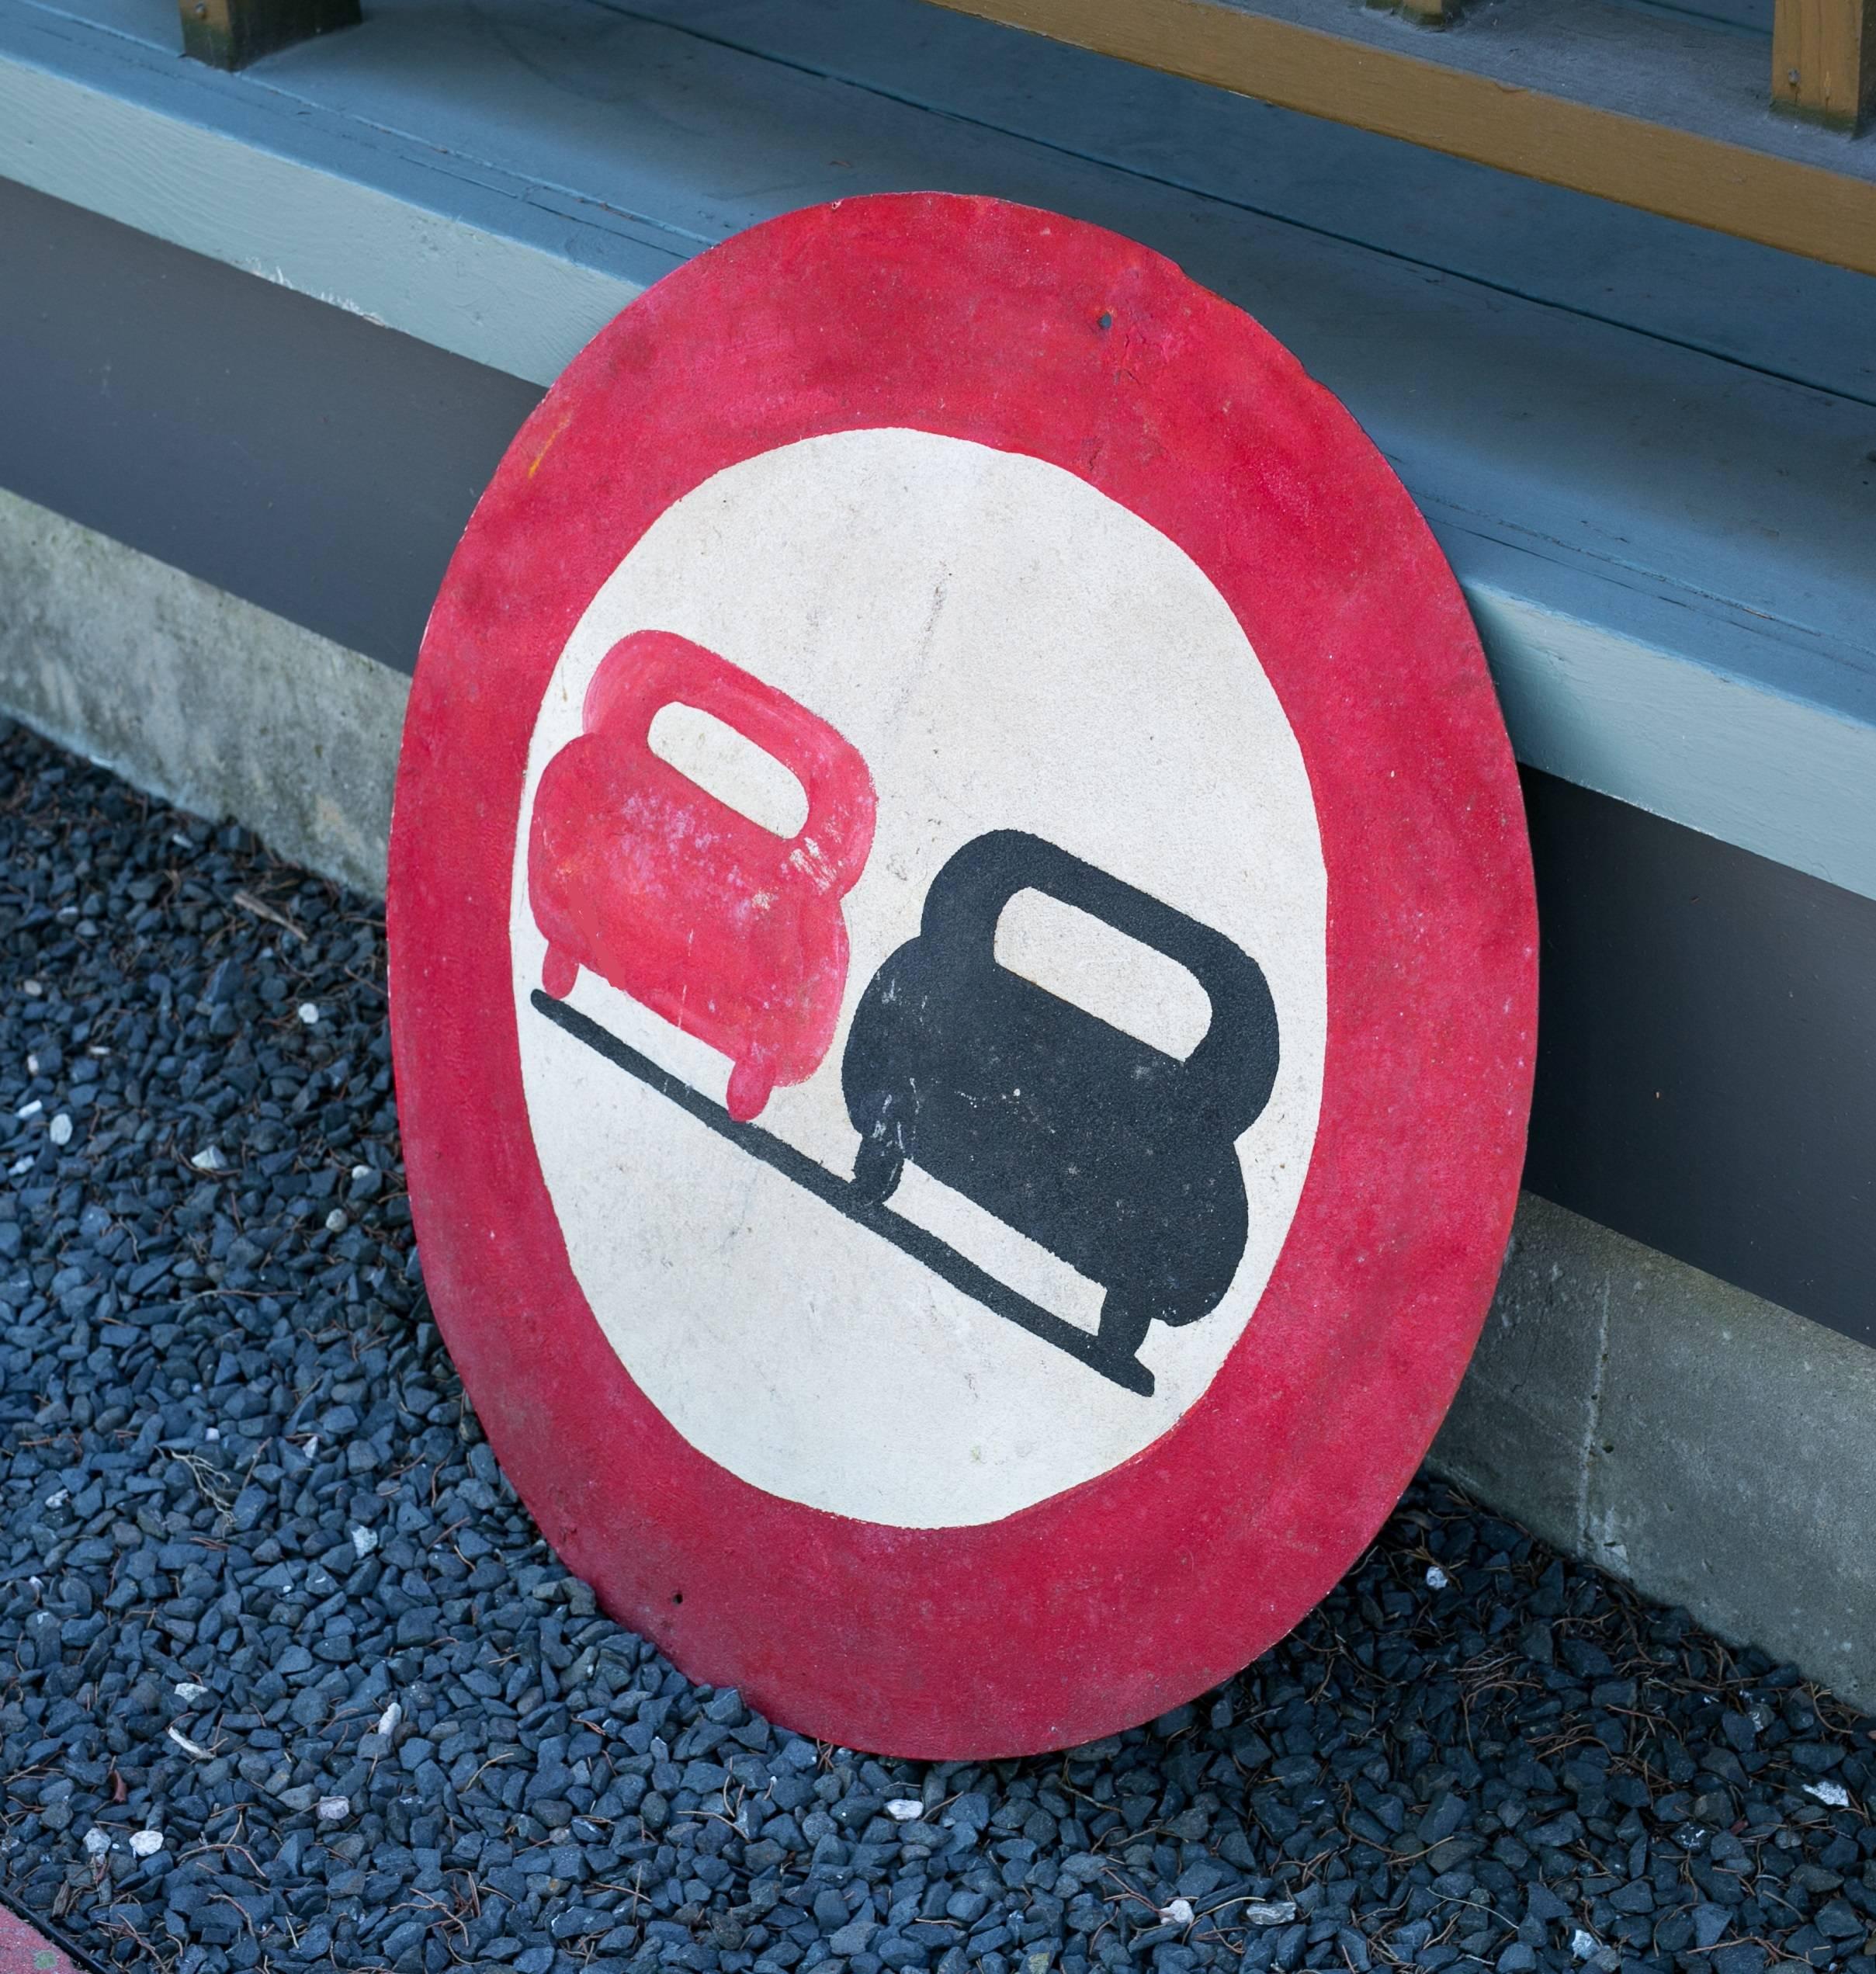 Industrial Graphic Hand-Painted Red and Black Road Safety Sign from France, circa 1930